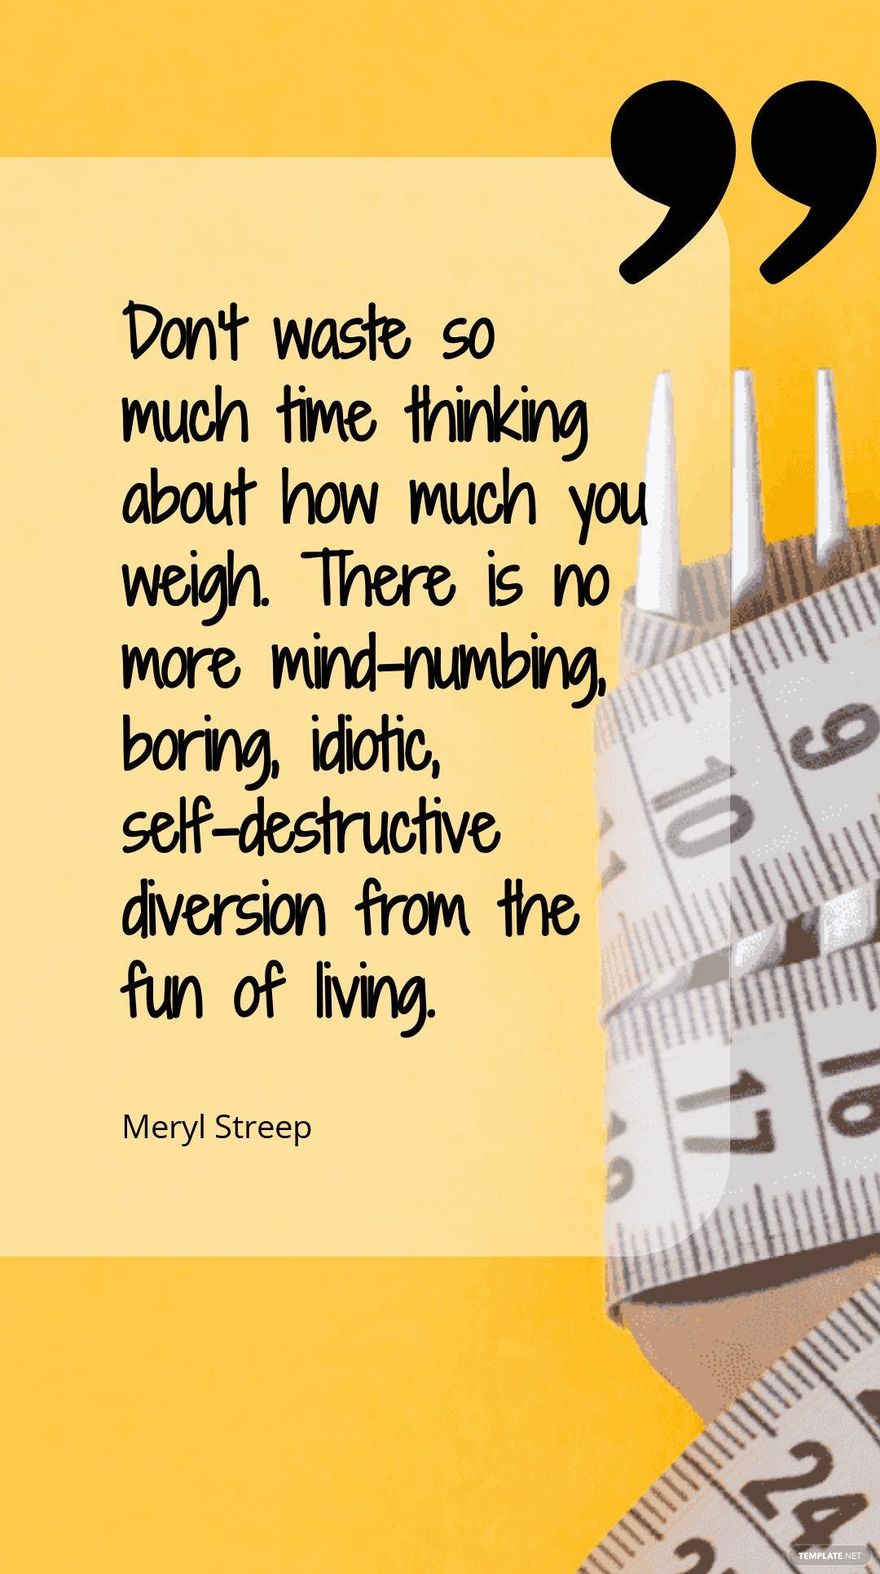 Meryl Streep - Don’t waste so much time thinking about how much you weigh. There is no more mind-numbing, boring, idiotic, self-destructive diversion from the fun of living.